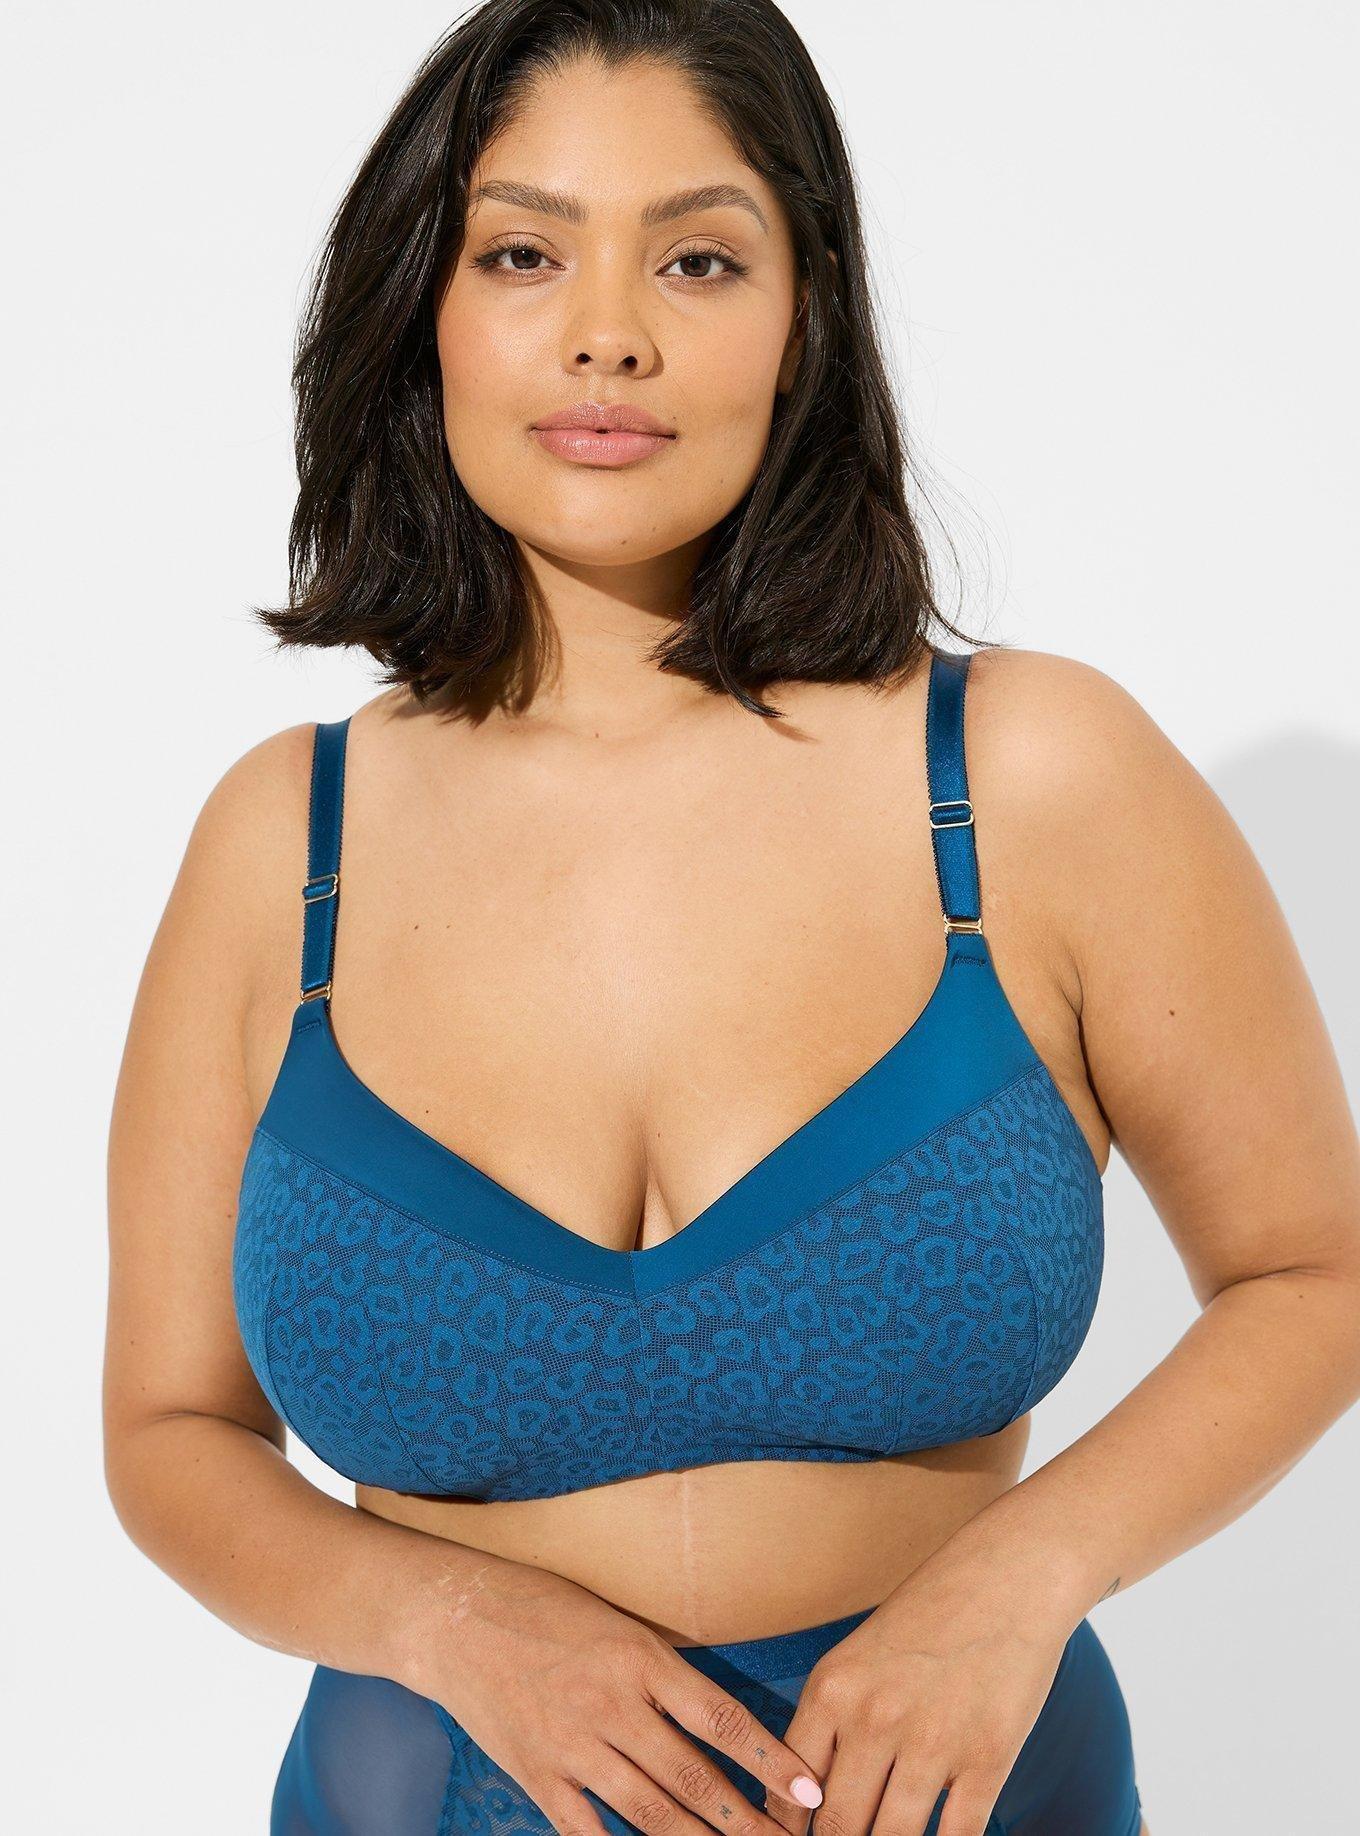 Full Figure Figure Types in 40G Bra Size DD Cup Sizes Smoothing